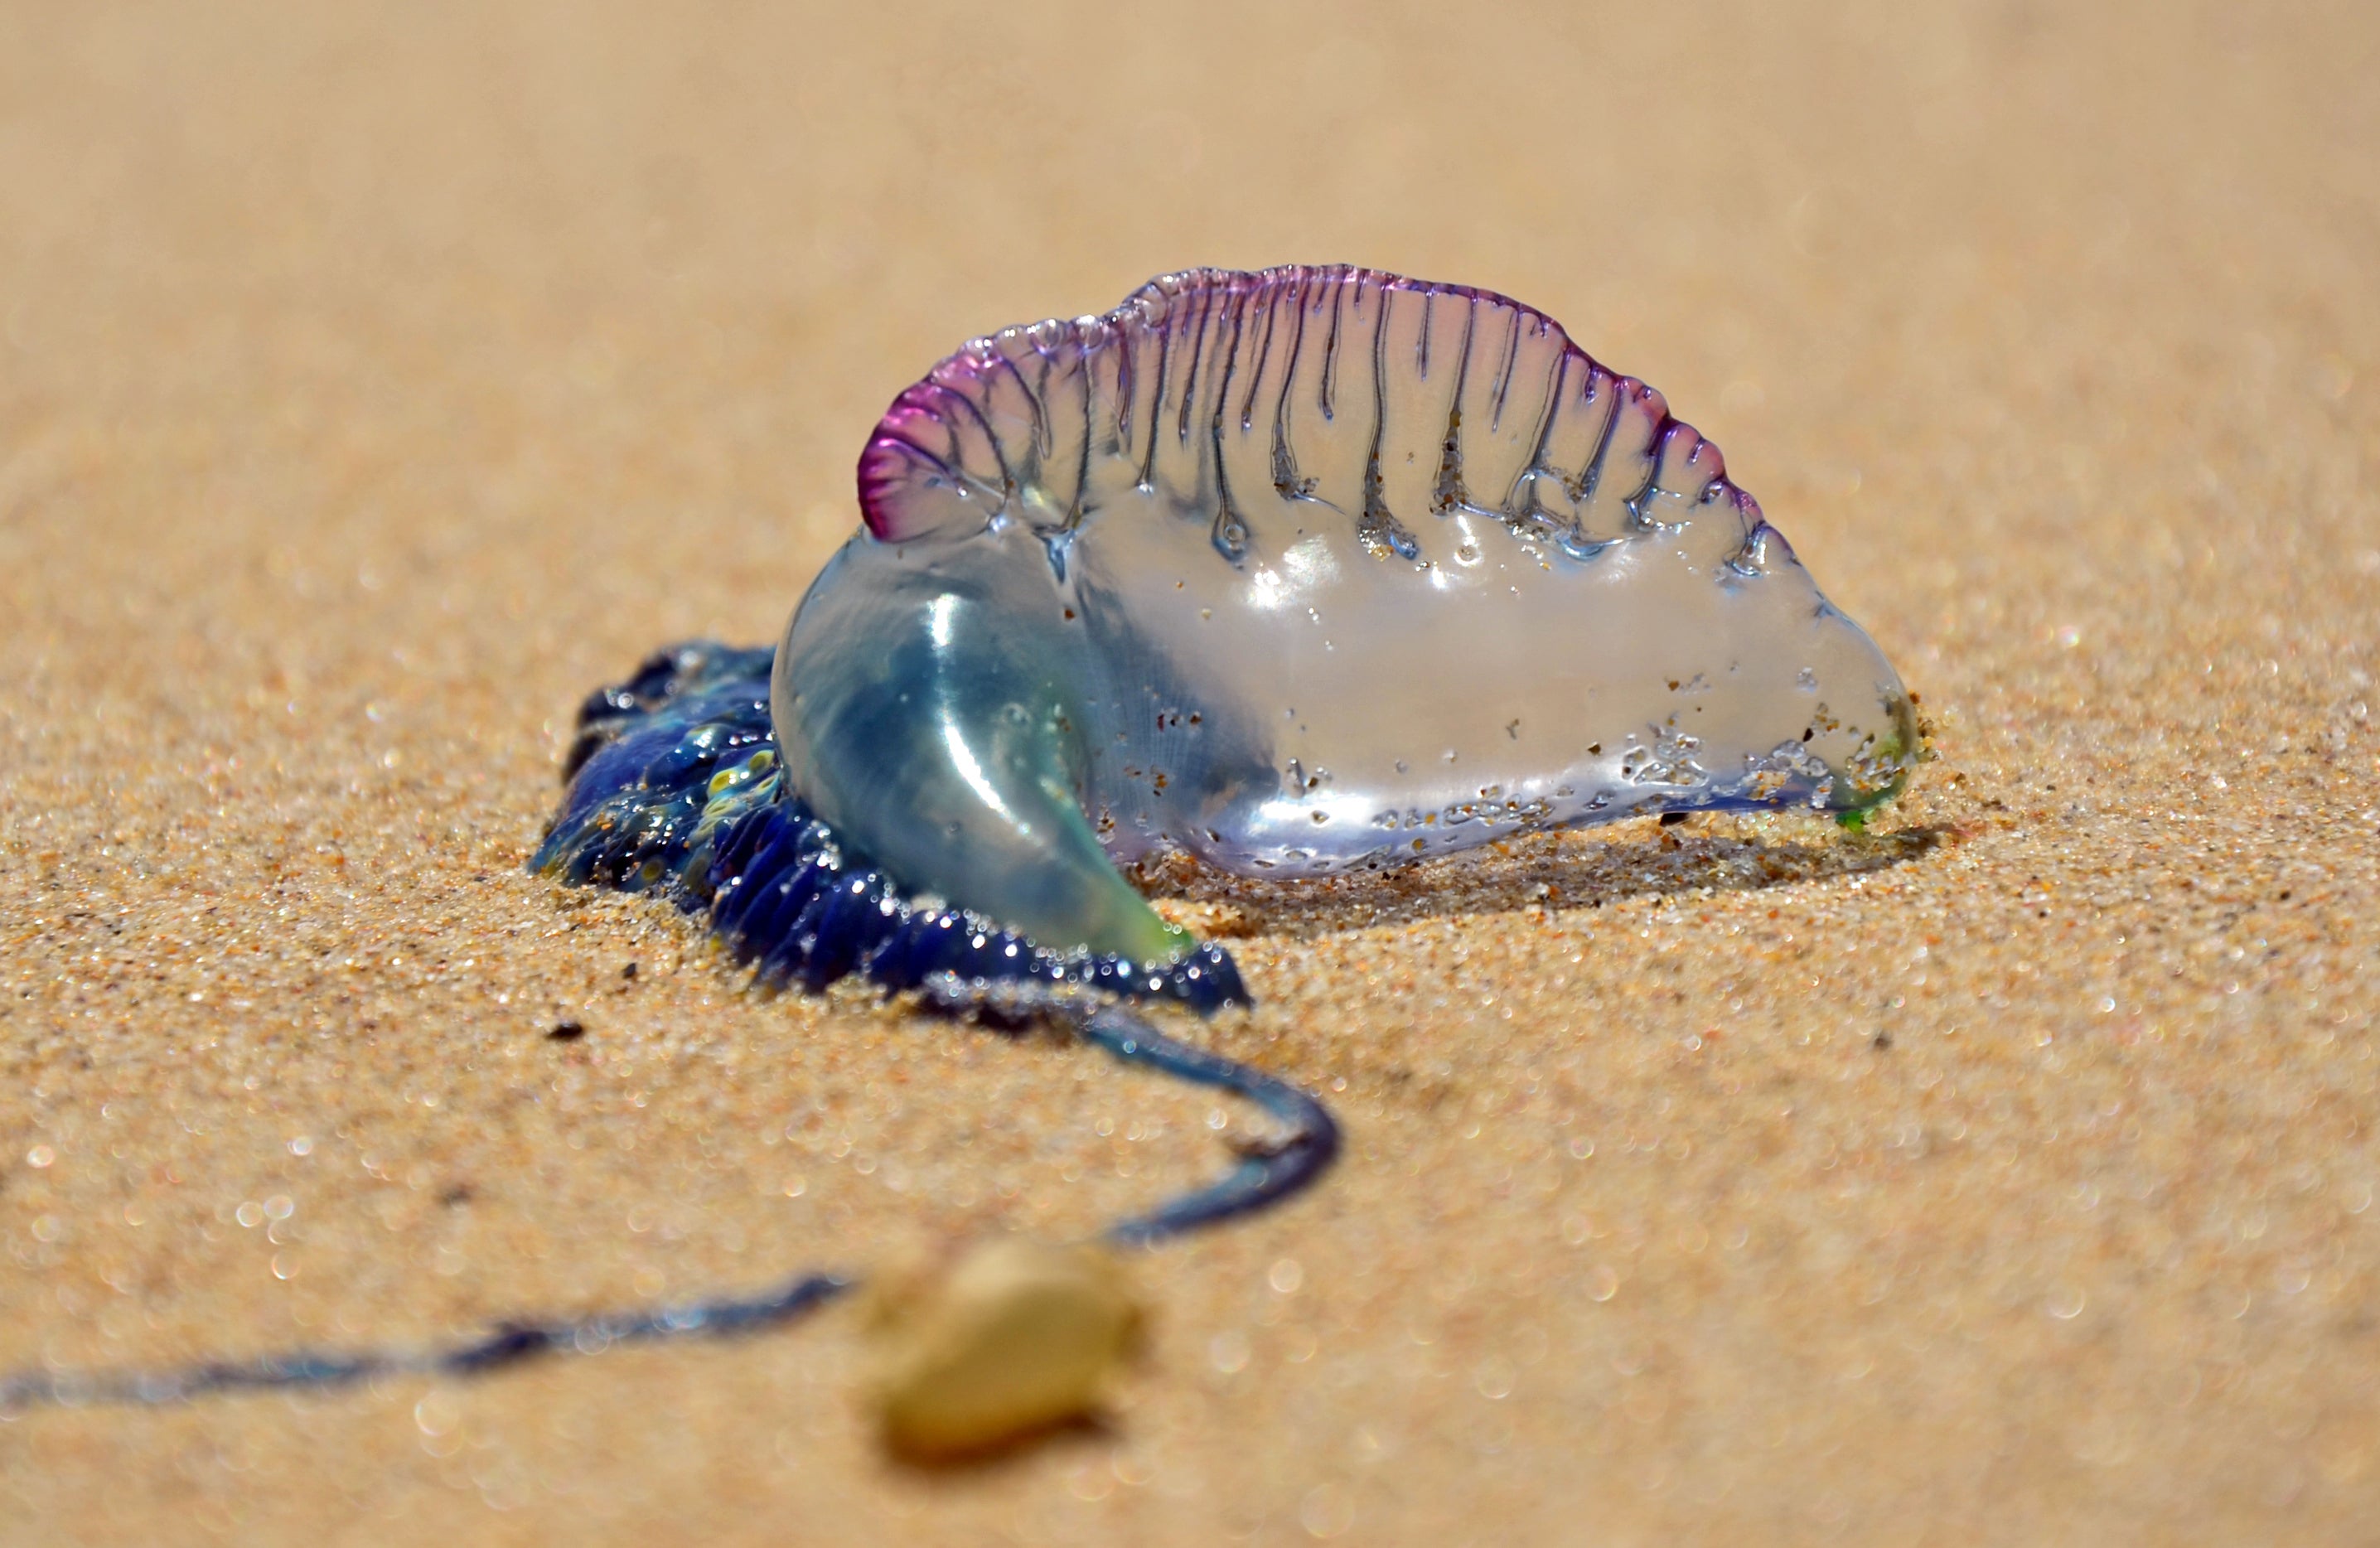 Portuguese man o' war have been increasingly washing up on the British coastline